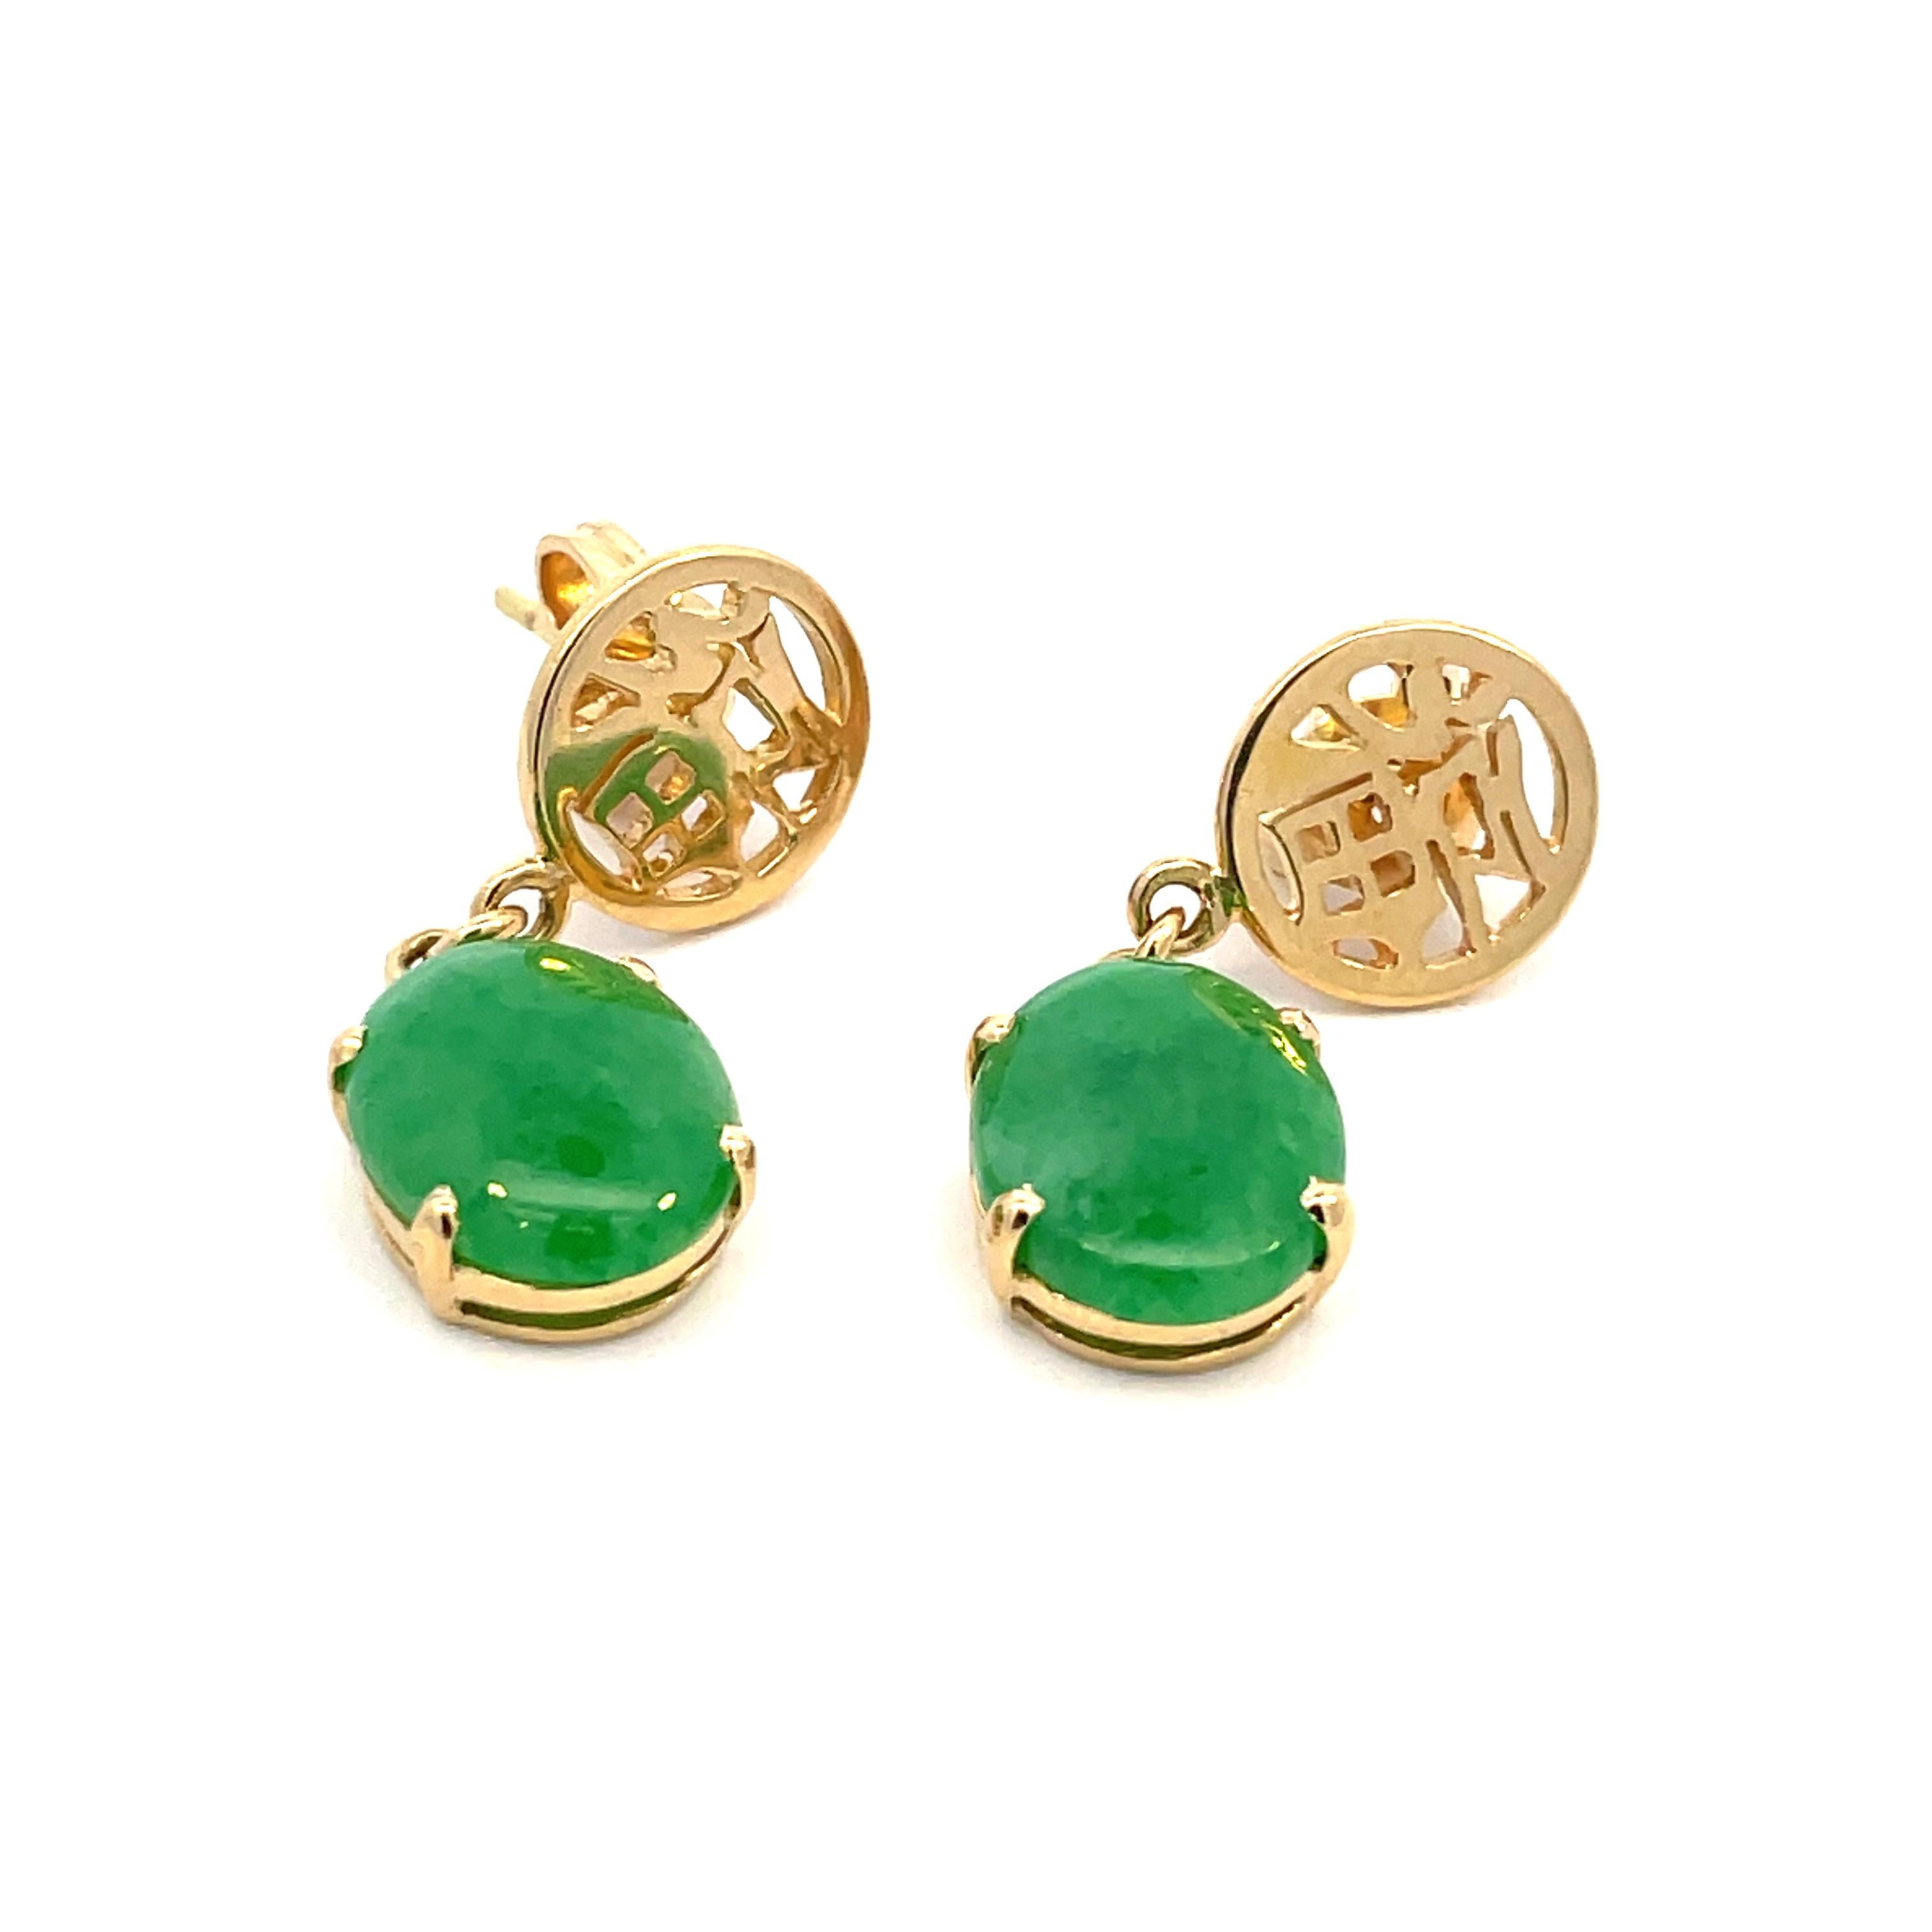 - 18K Yellow Gold 
- 2=6.12 tw Cabochon Jades 
- 5.87 Grams 
- GIA #7679

This is a gorgeous pair of 18k yellow gold and jade earrings from the 1960s. These earrings feature 2 large cabochon cut jades, both with a rich green hue, totaling 6.12 total